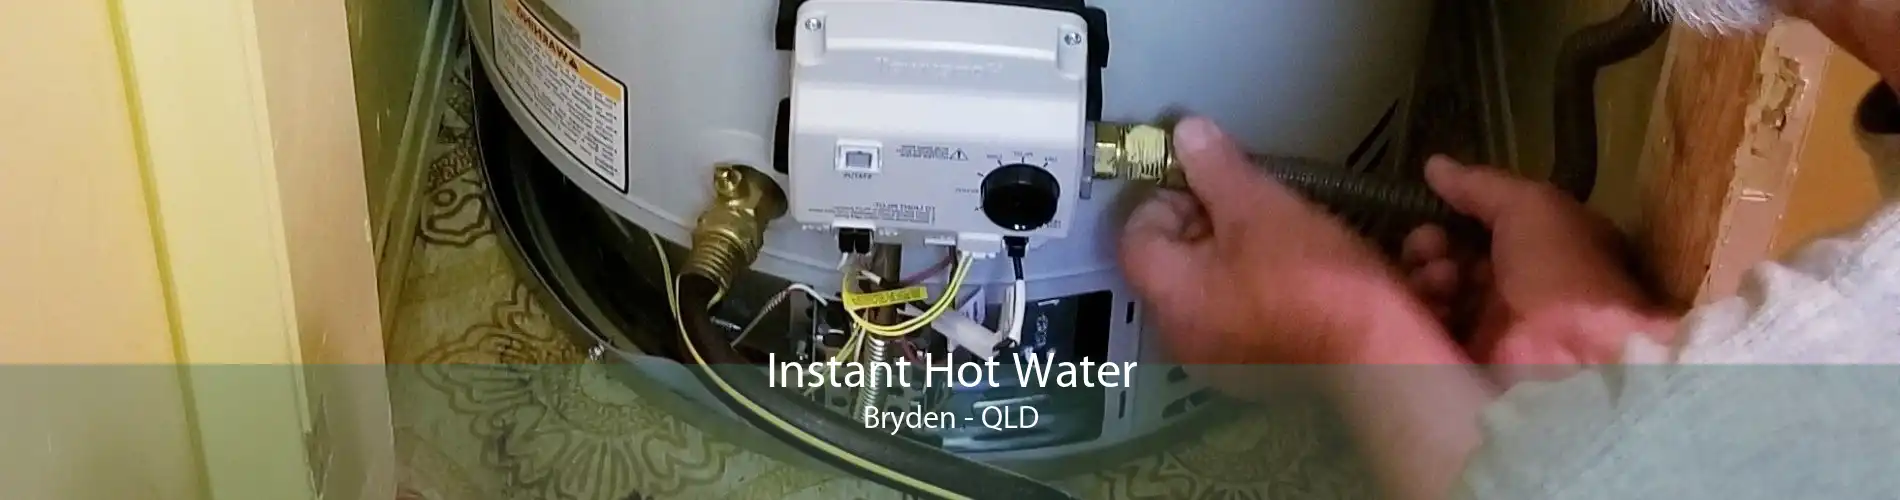 Instant Hot Water Bryden - QLD